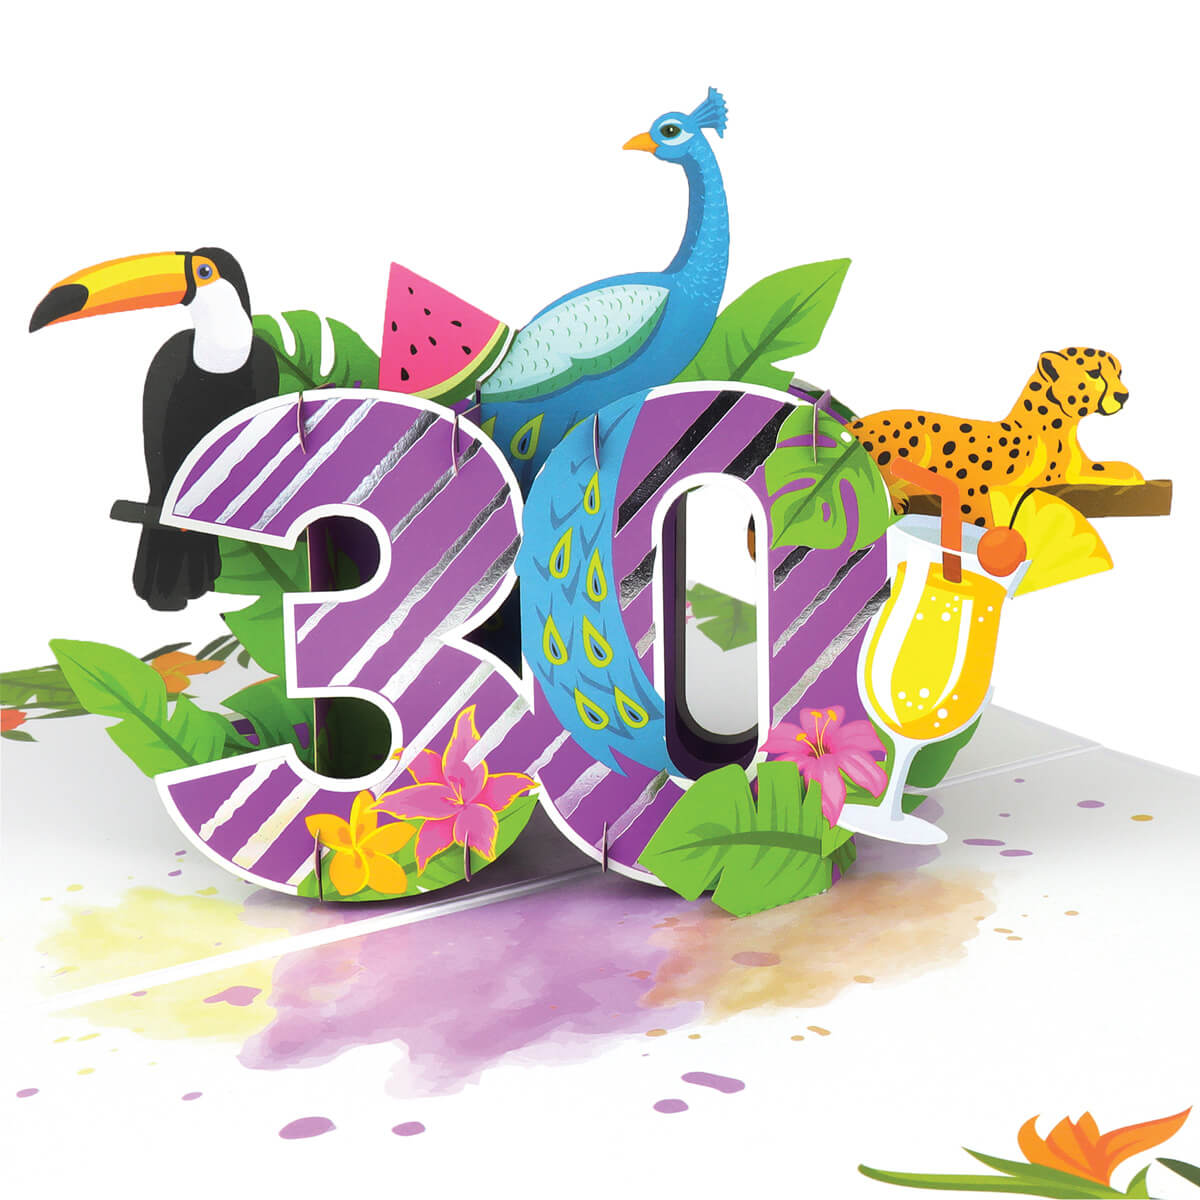 close up image of tropical 30th birthday pop up card, featuring a purple with silver stripes 3D 30 and surrounded by toucans, peacocks, cheetahs, and other tropical themes